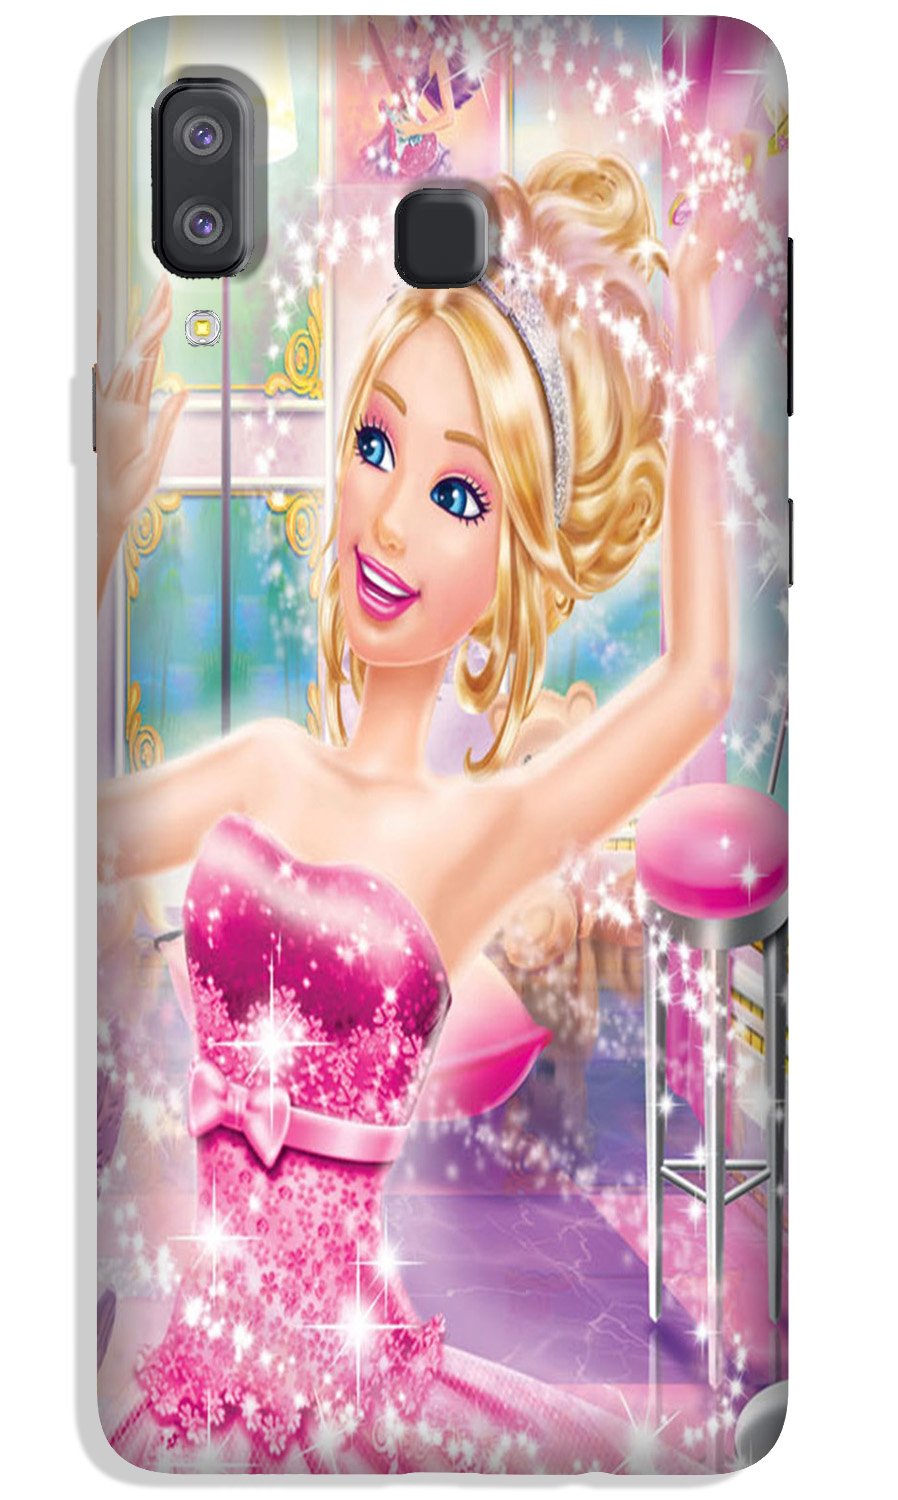 Princesses Case for Galaxy A8 Star